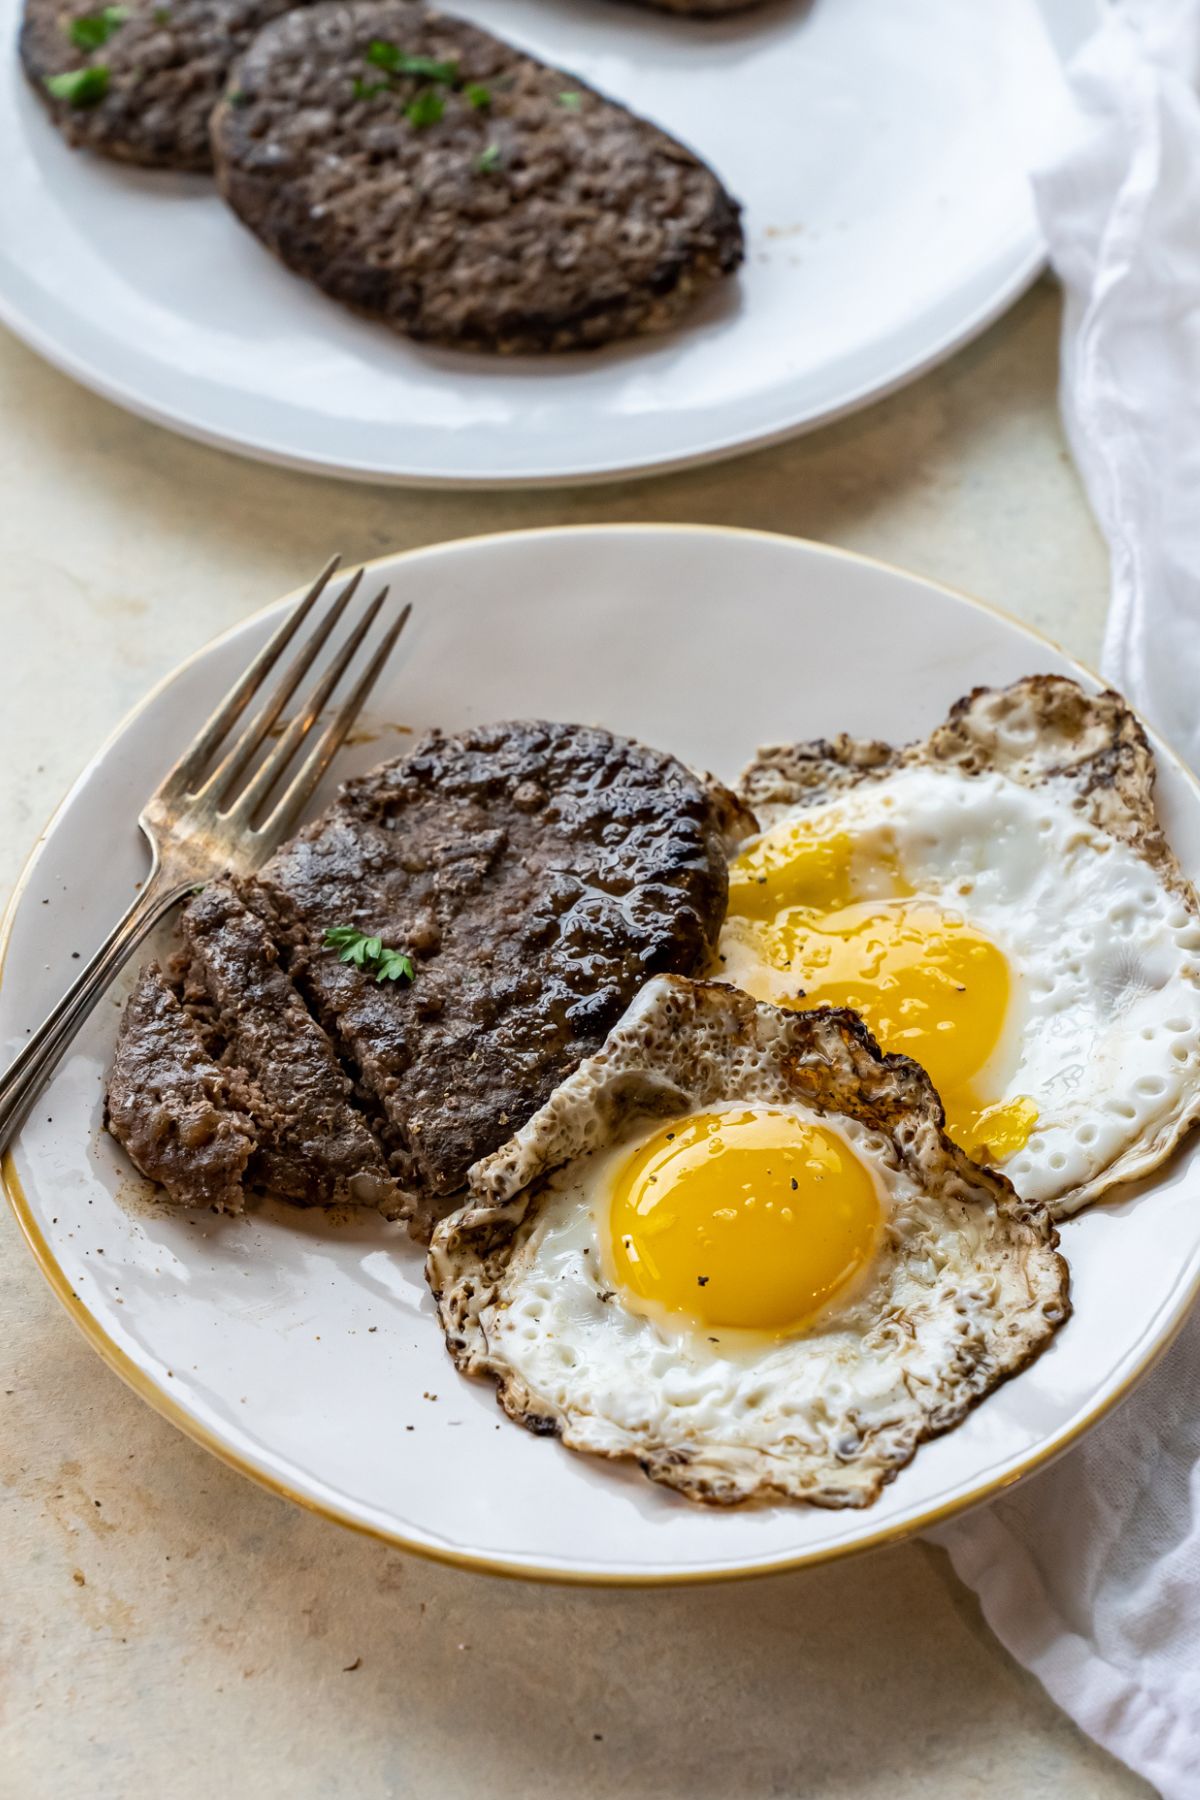 A plate of steak and eggs with a fork.